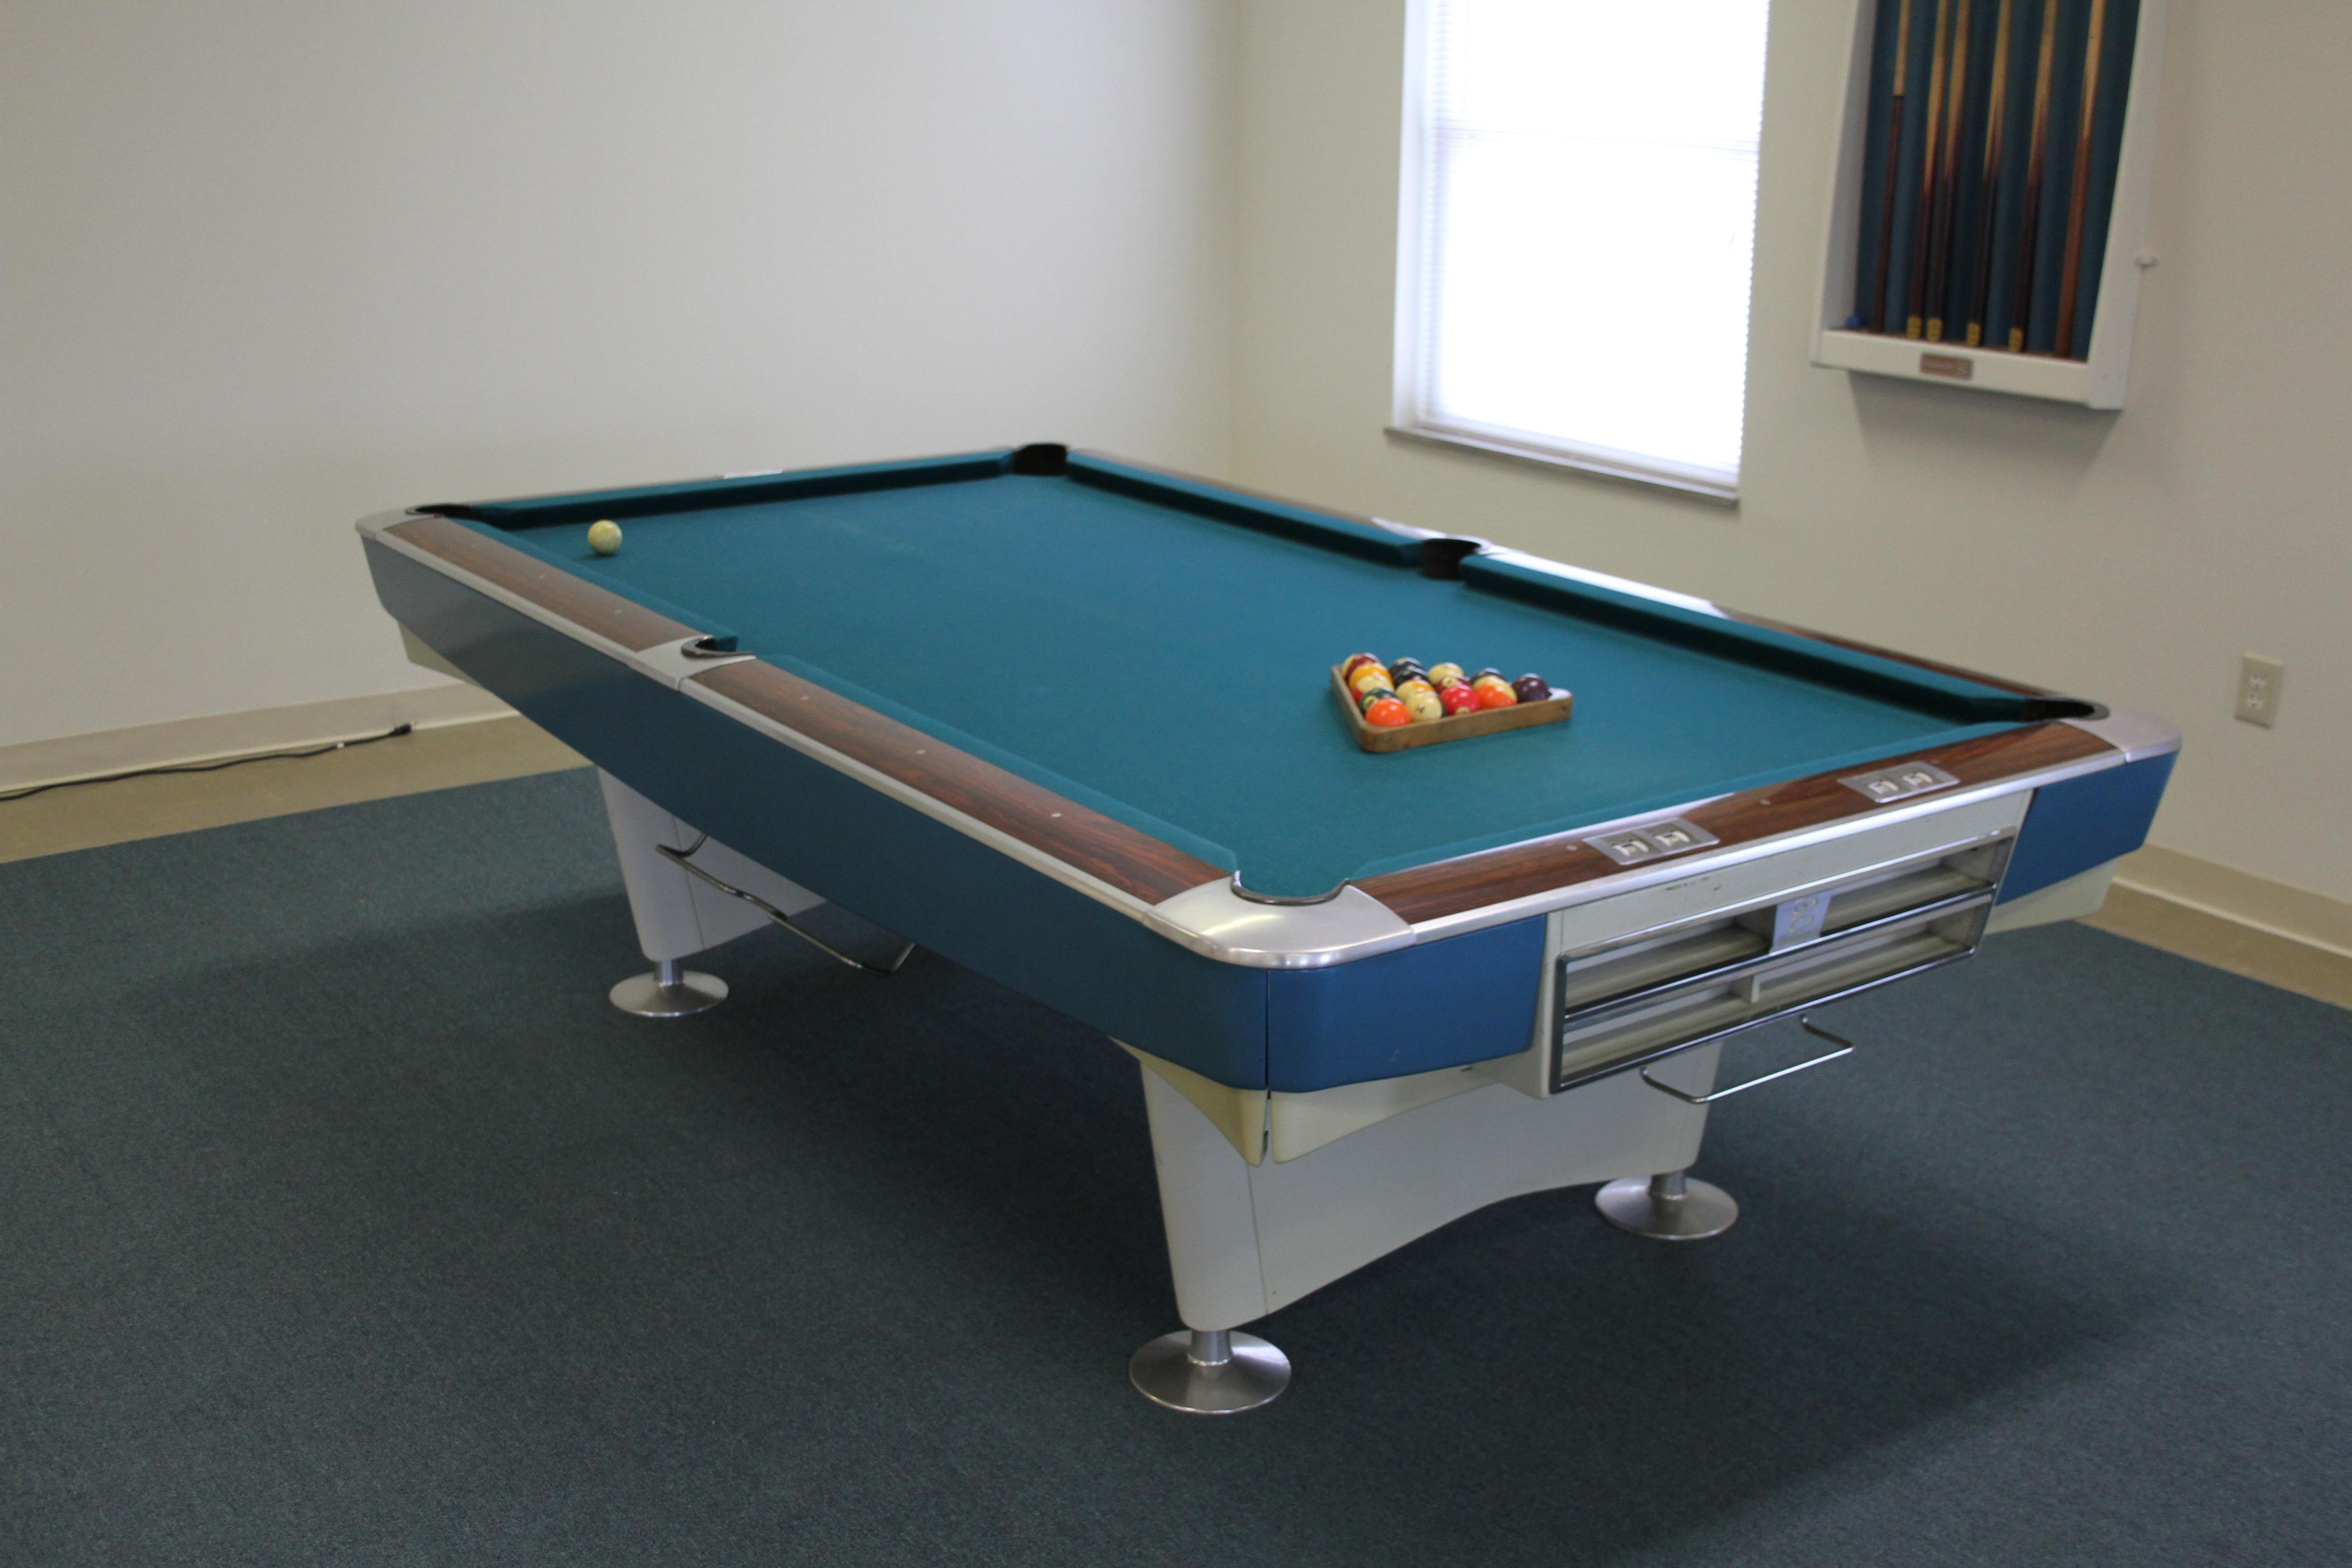 American Mid-Century Modern Brunswick Gold Crown I Billiards Pool Table with Blue Aprons